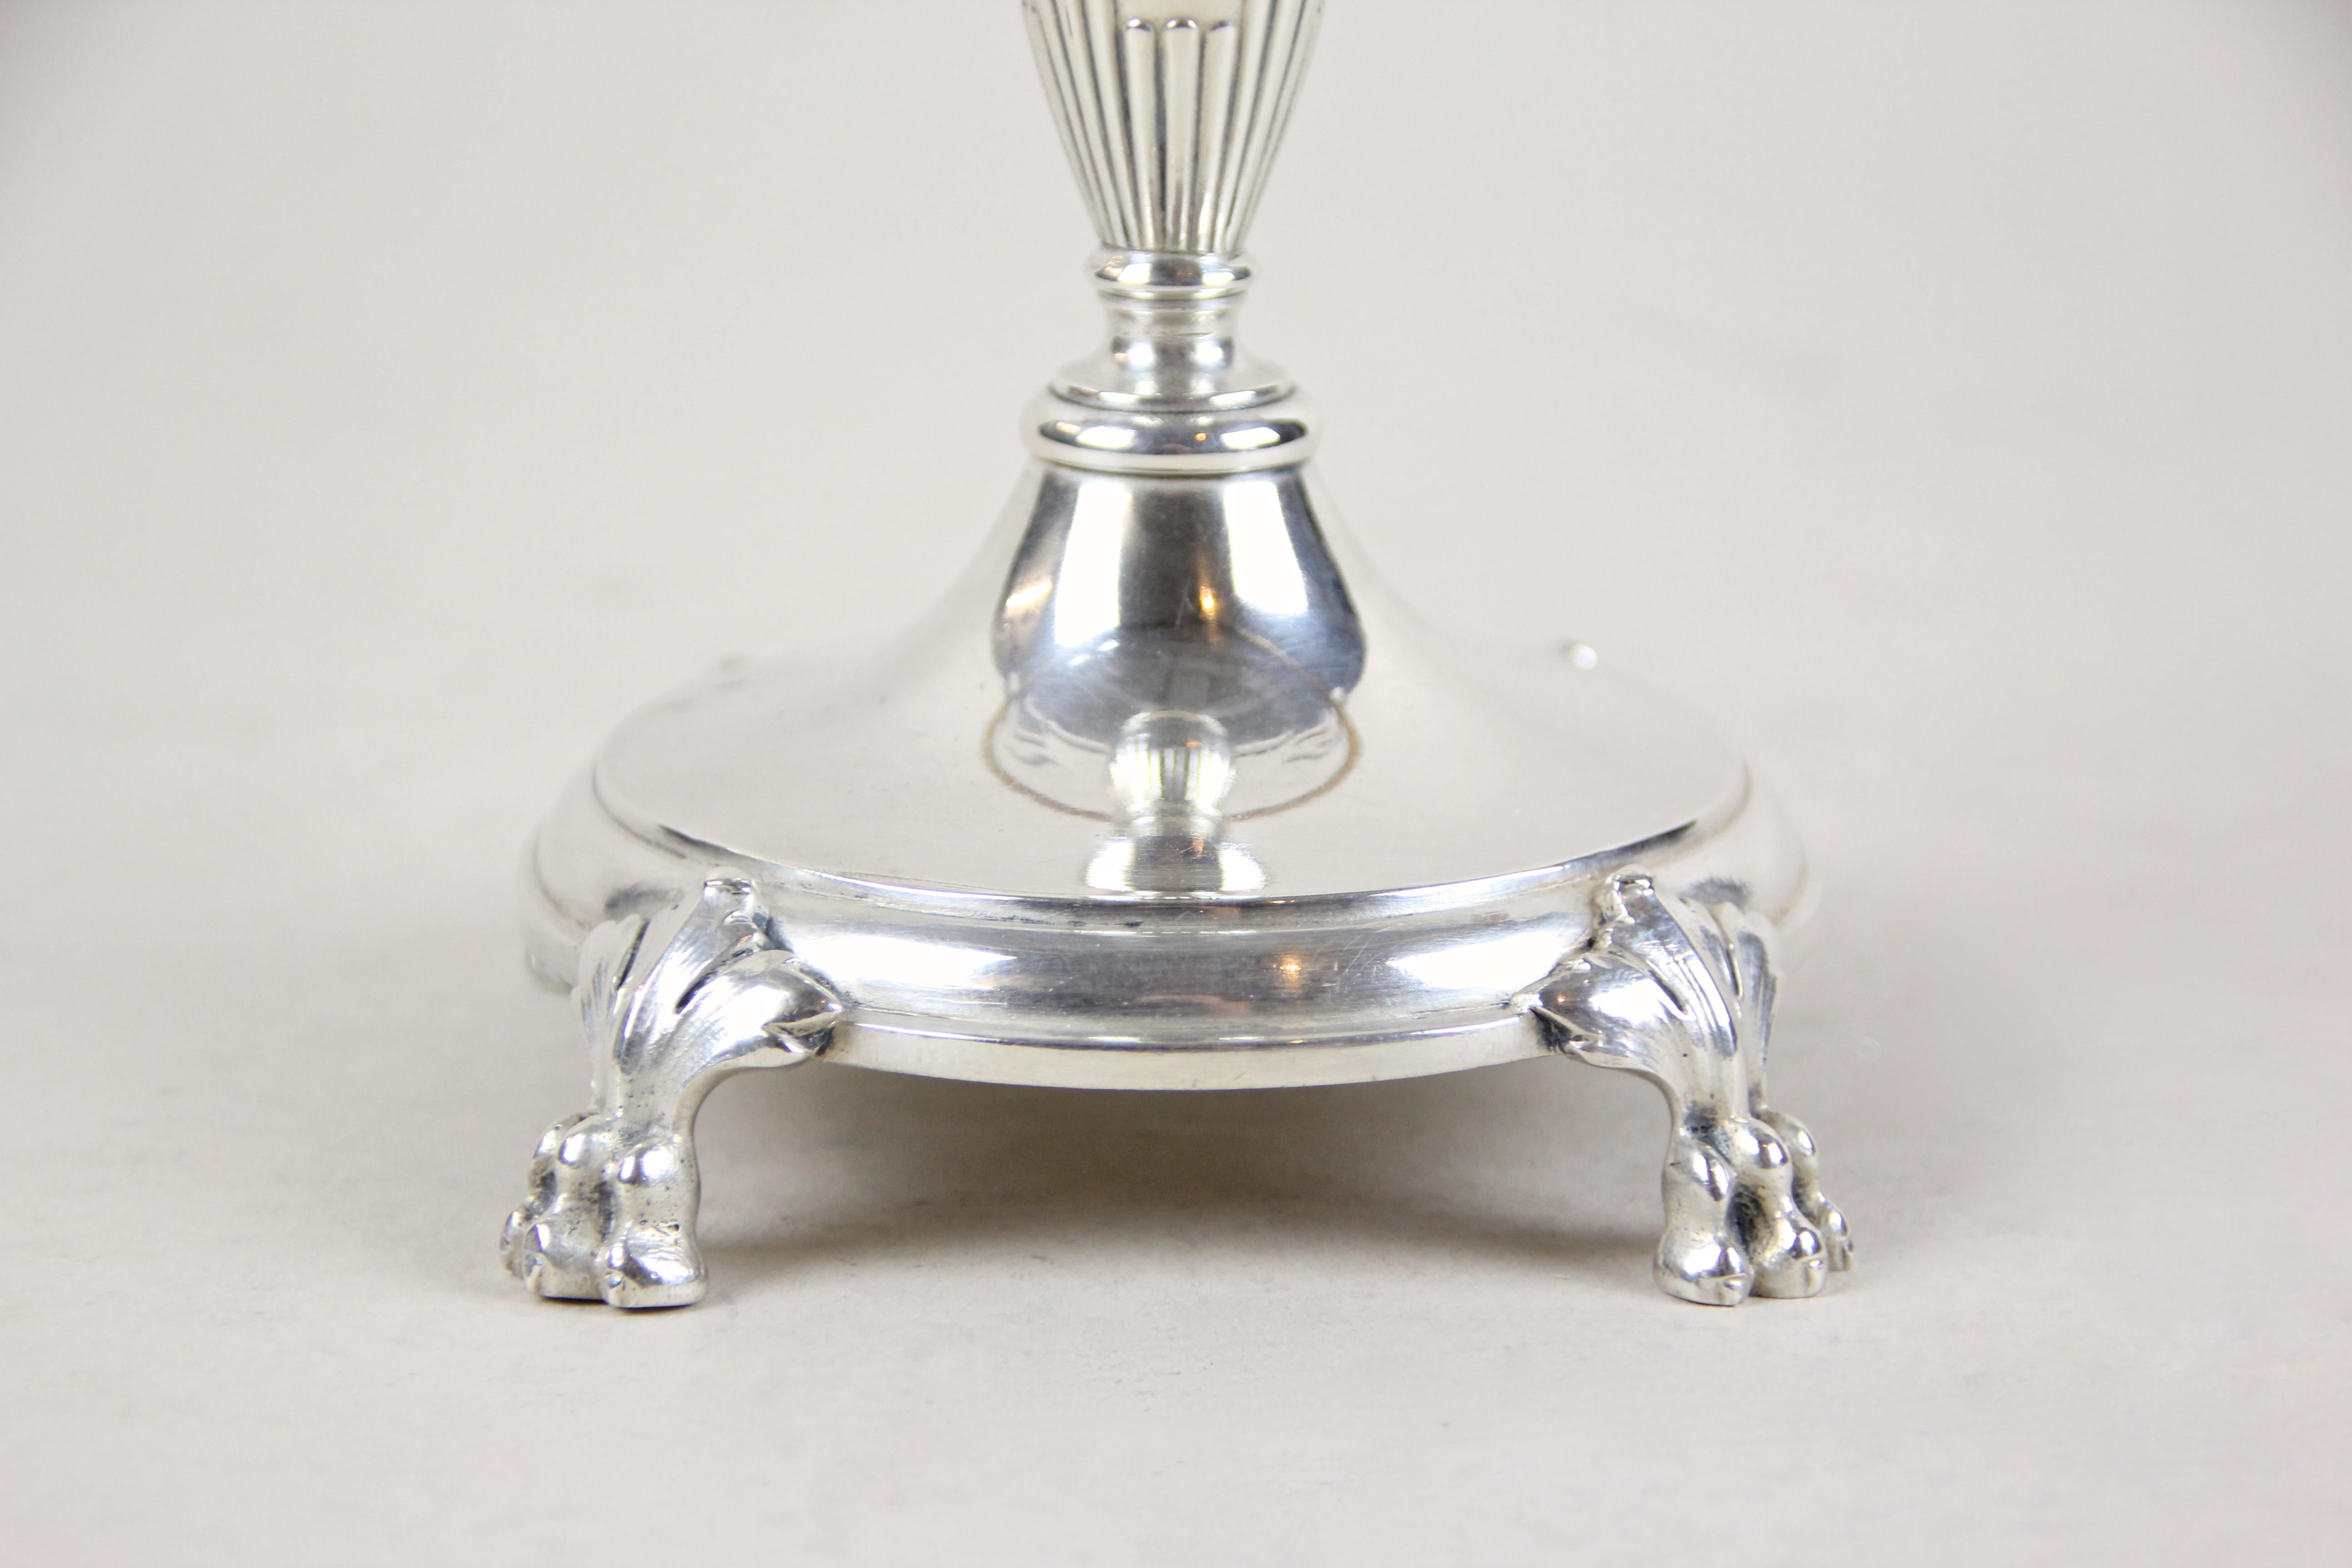 Outstanding silvered centerpiece by Berndorf with a beautiful Moser Glassworks plate on top. This masterpiece was processed in the Art Nouveau period in Austria circa 1910 and is adorned by an original Moser Glassworks plate adorned by a beautiful